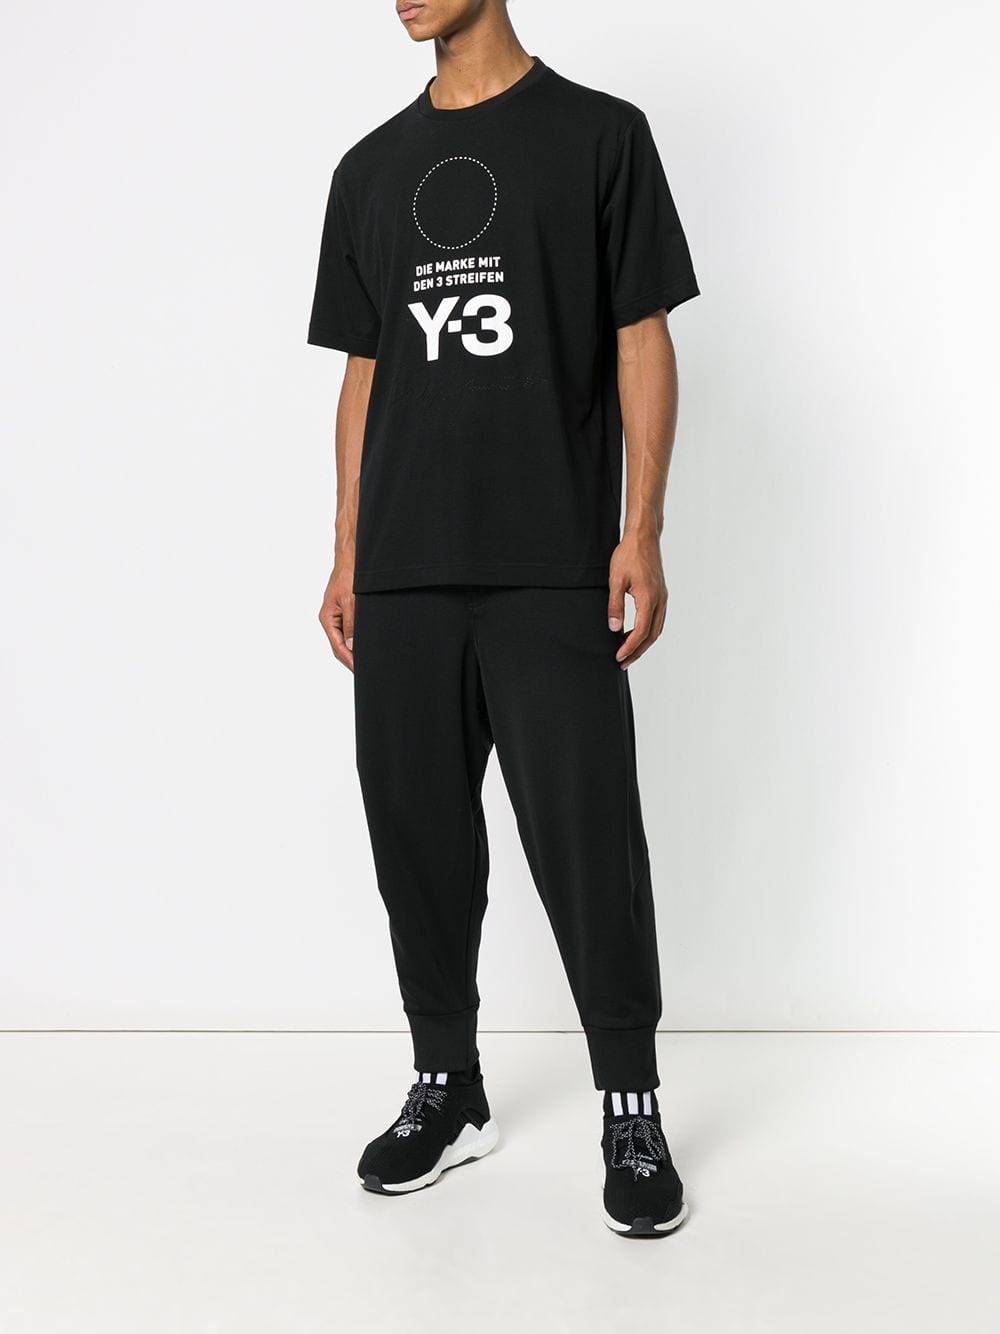 y-3 Y3 LOGO T-SHIRT available on montiboutique.com - 24548